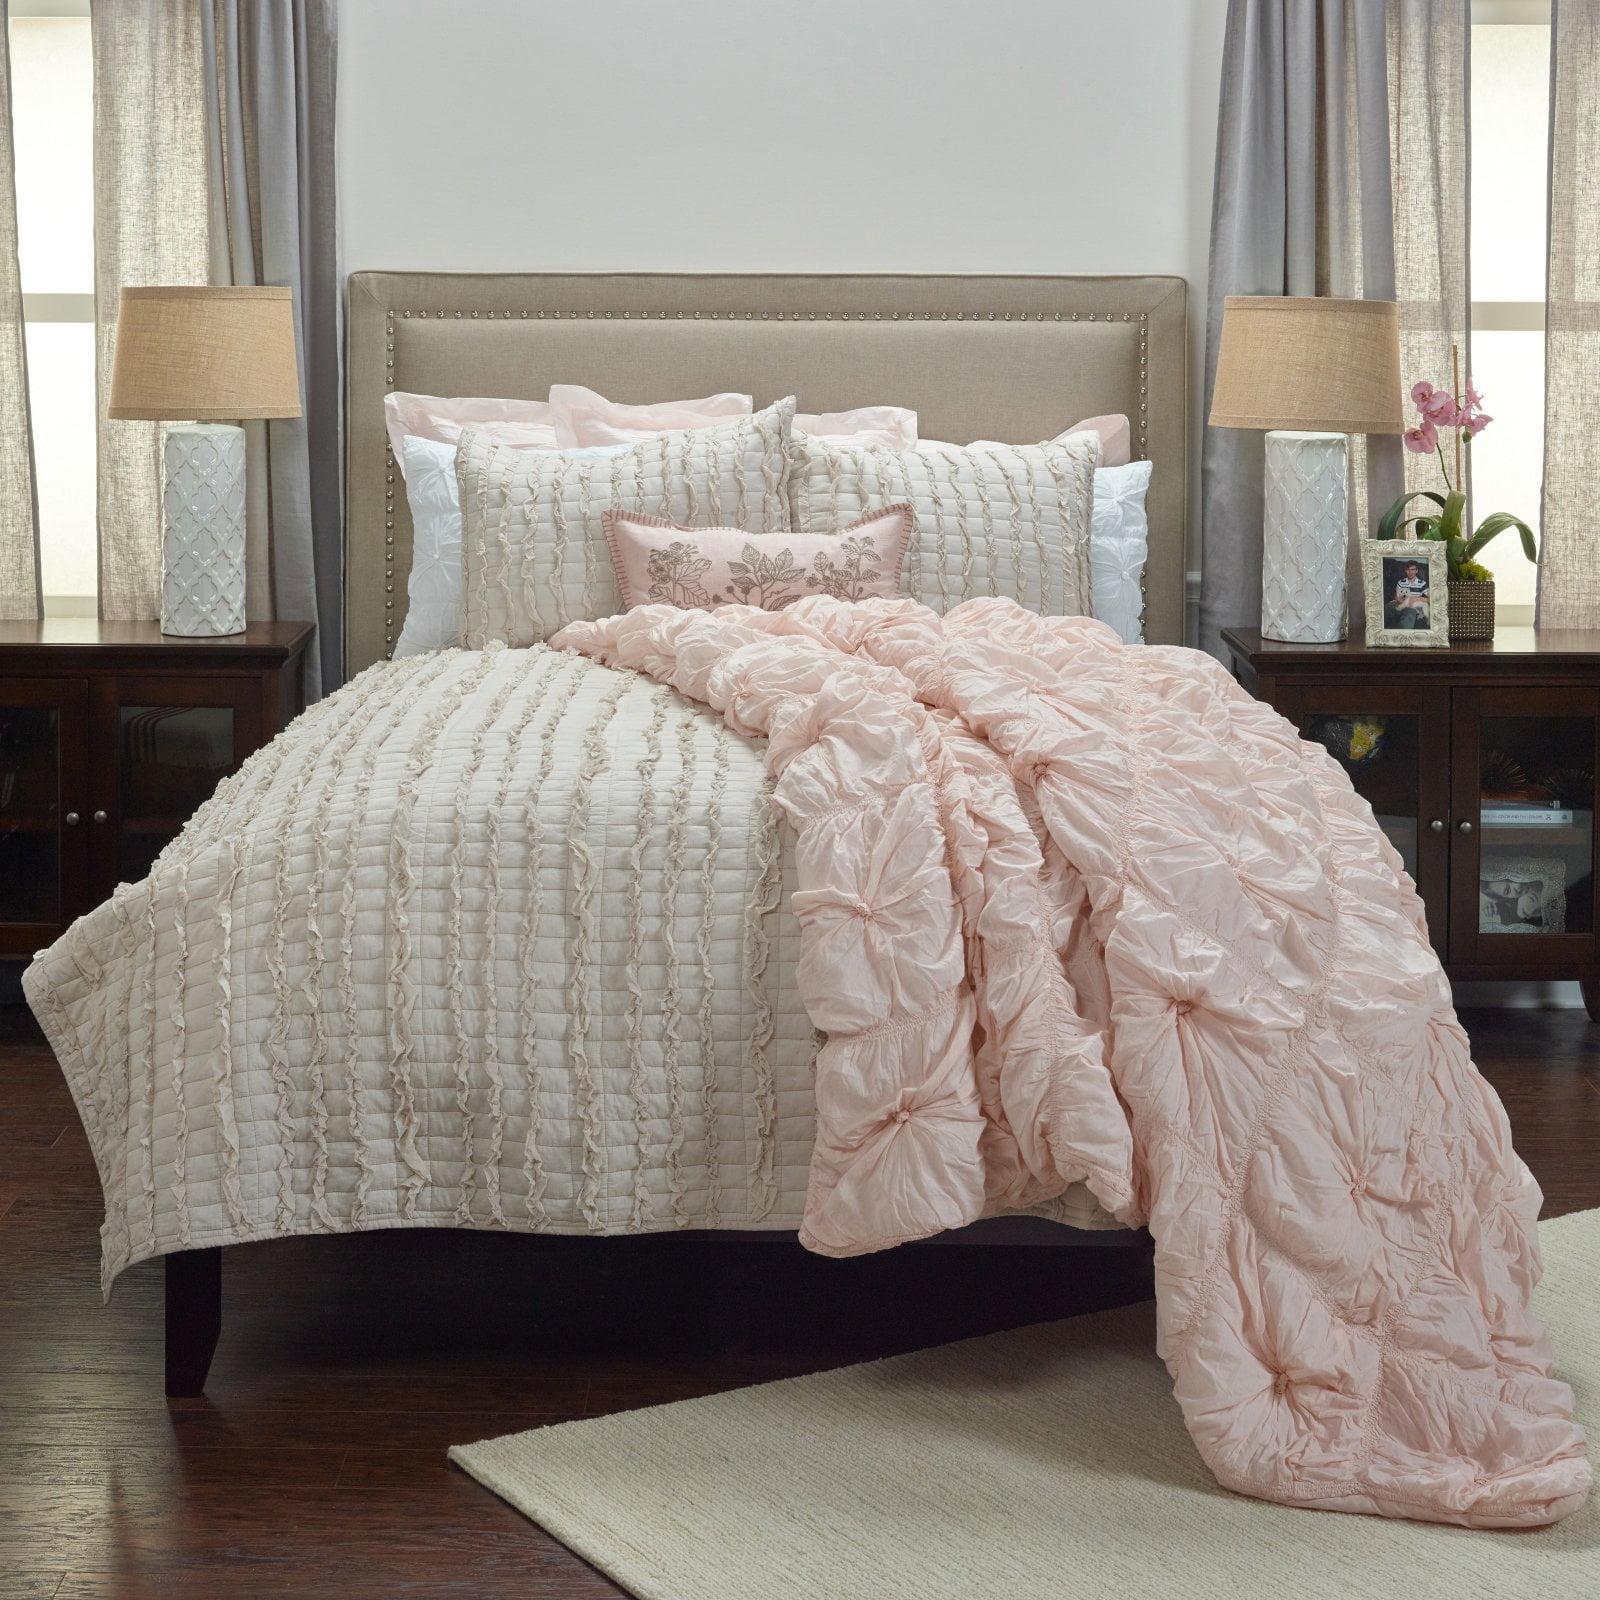 Blush Cotton King Quilt with Ruffled Voile Accents